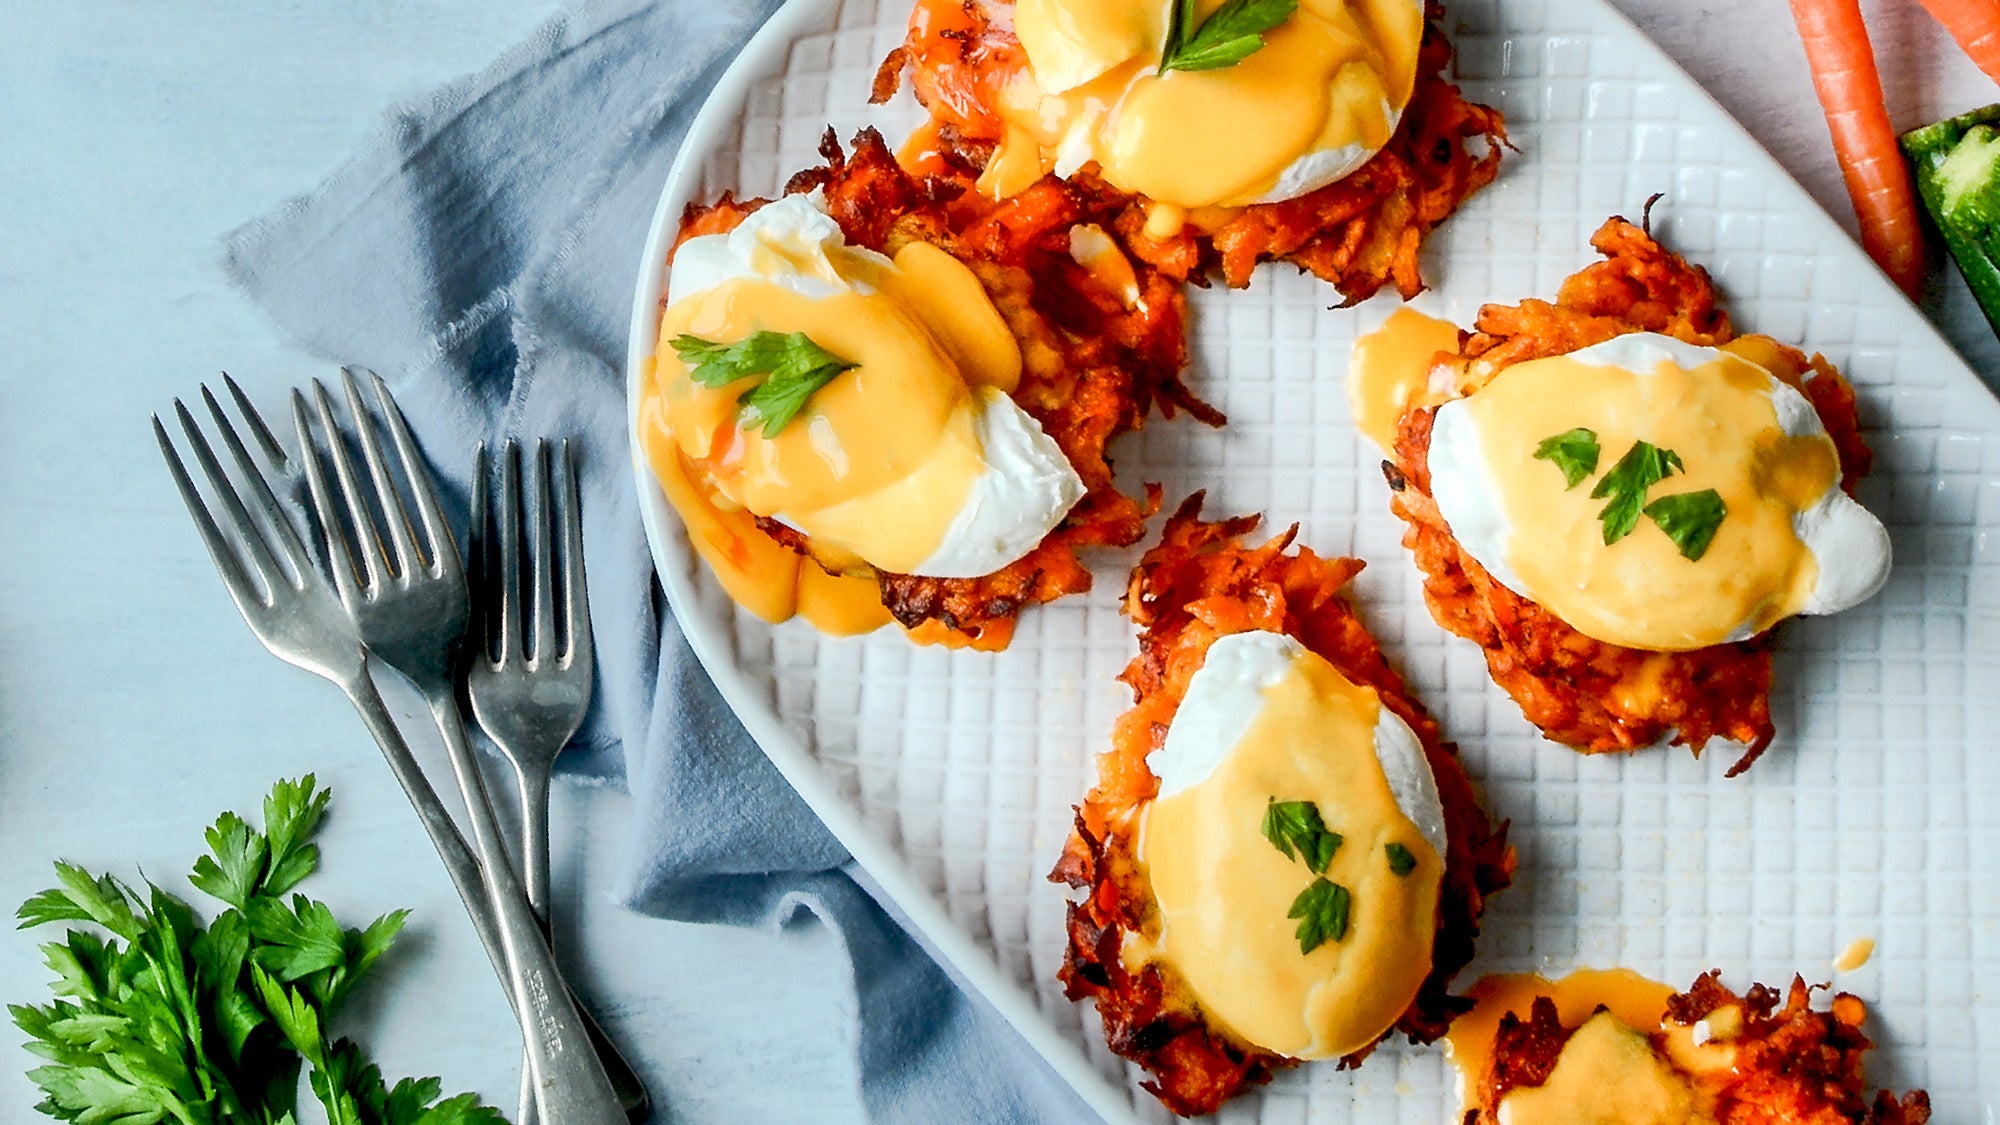 No-Muffin Eggs Benny with Ghee Hollandaise recipe